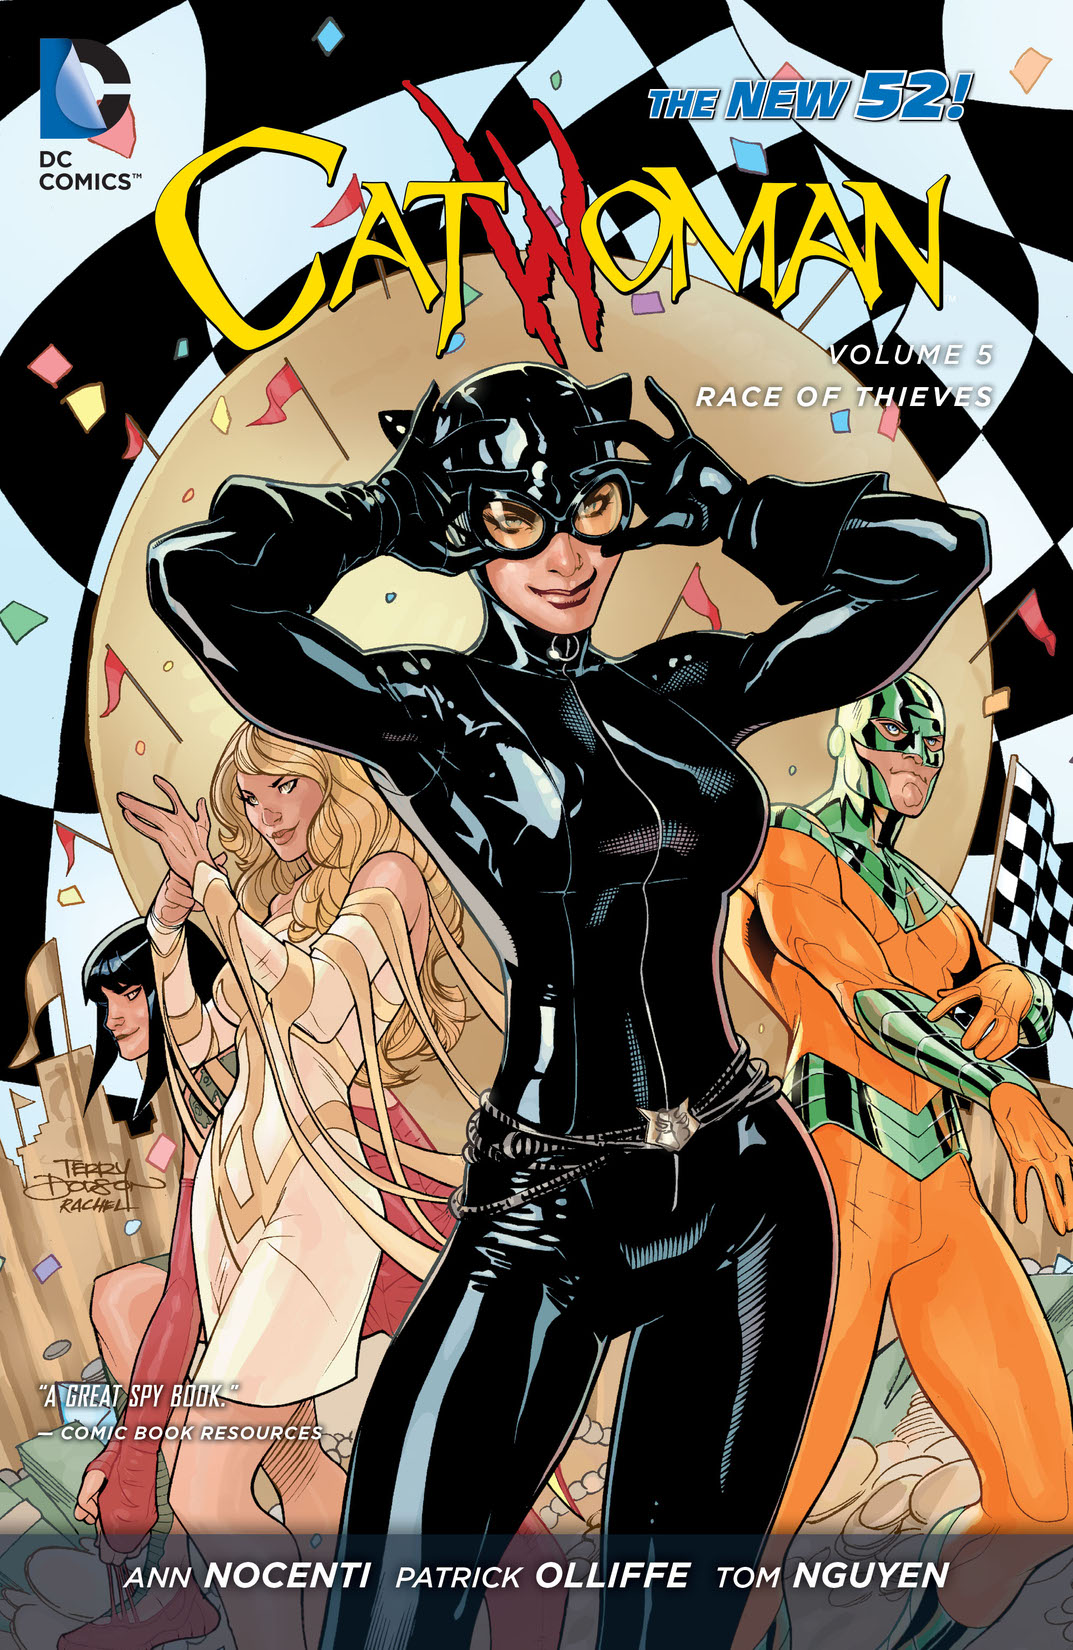 Catwoman Vol. 5: Race of Thieves preview images